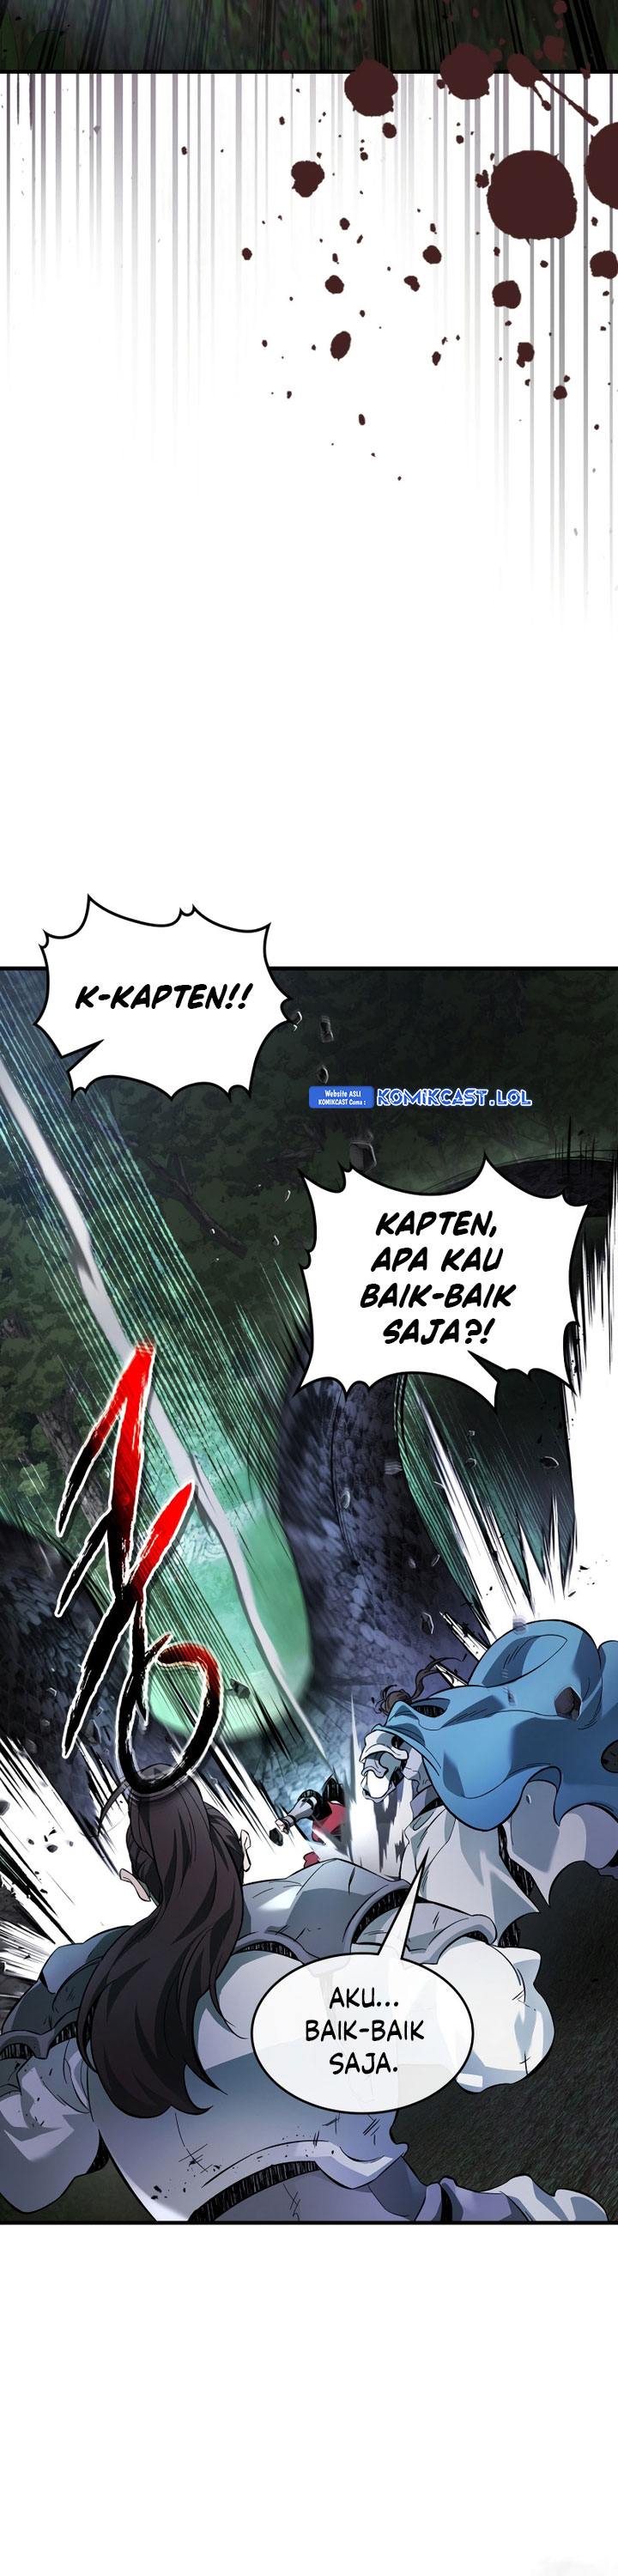 Leveling With The Gods Chapter 98